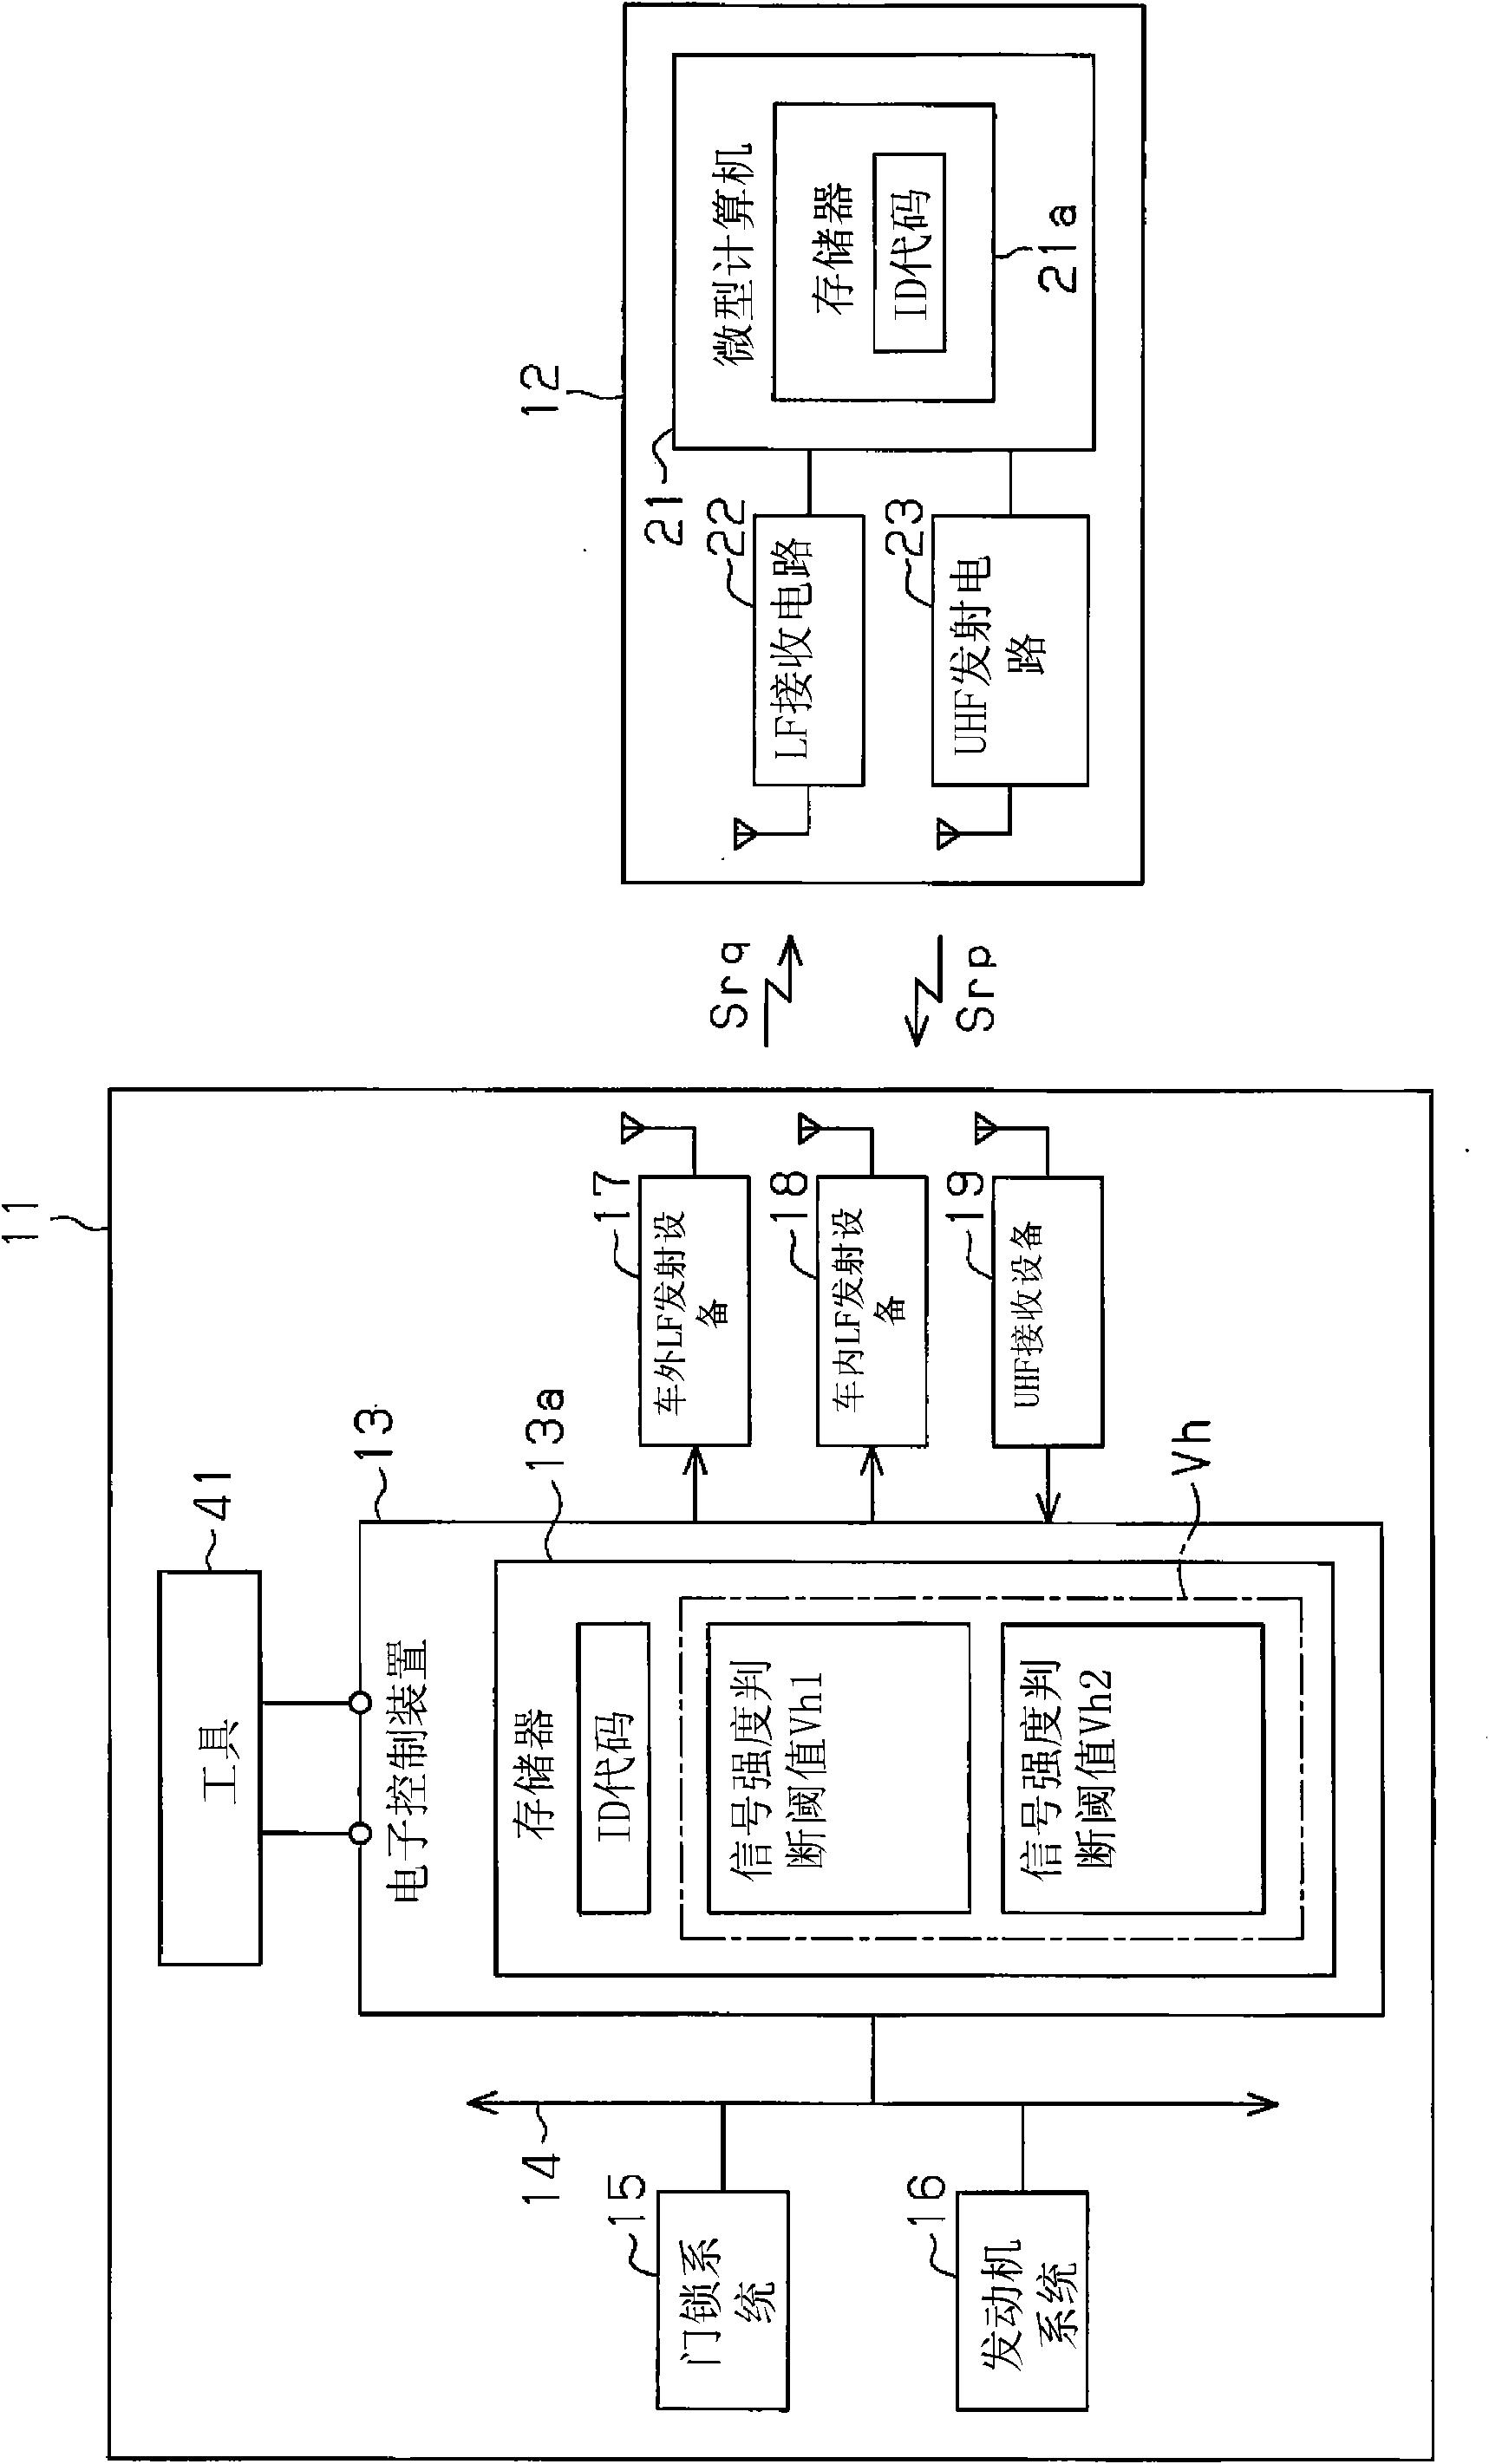 Portable device and remote control system